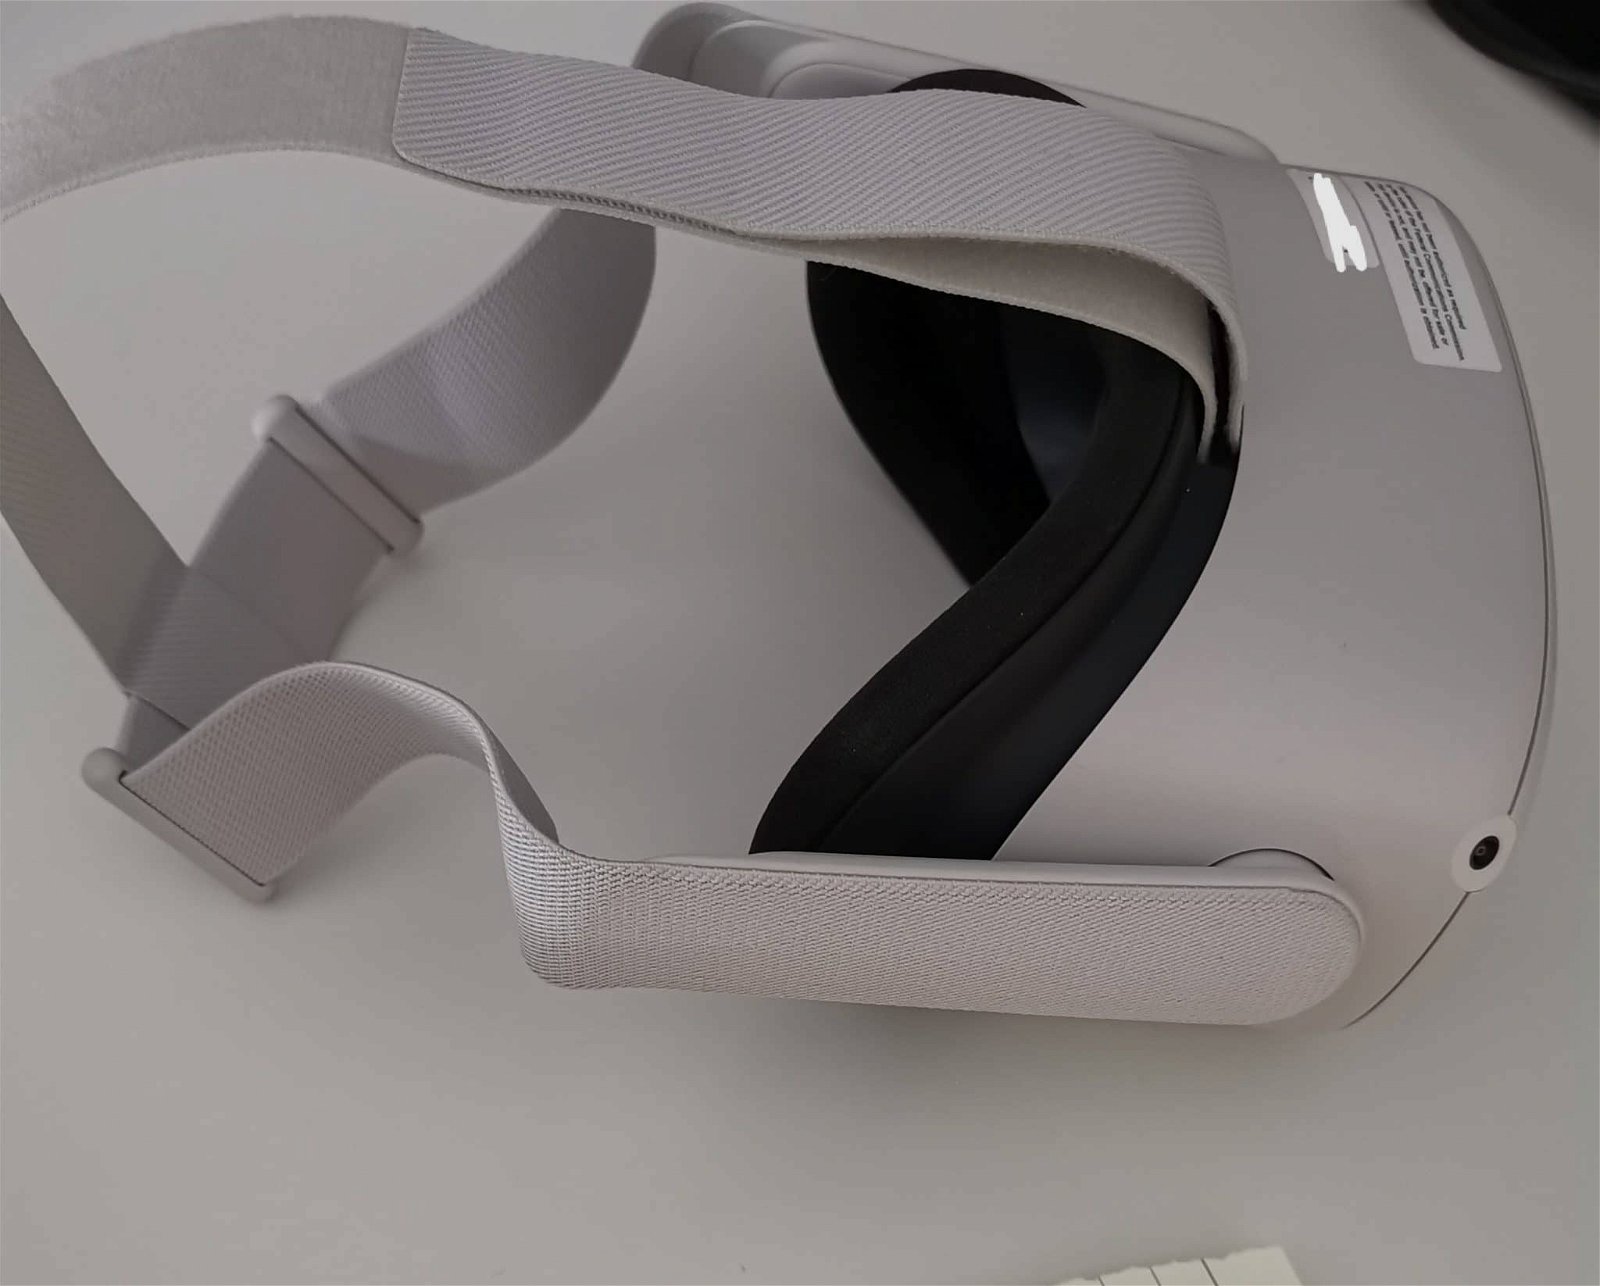 More Oculus Quest 2 Leaks Bring New Images And Ipd Details